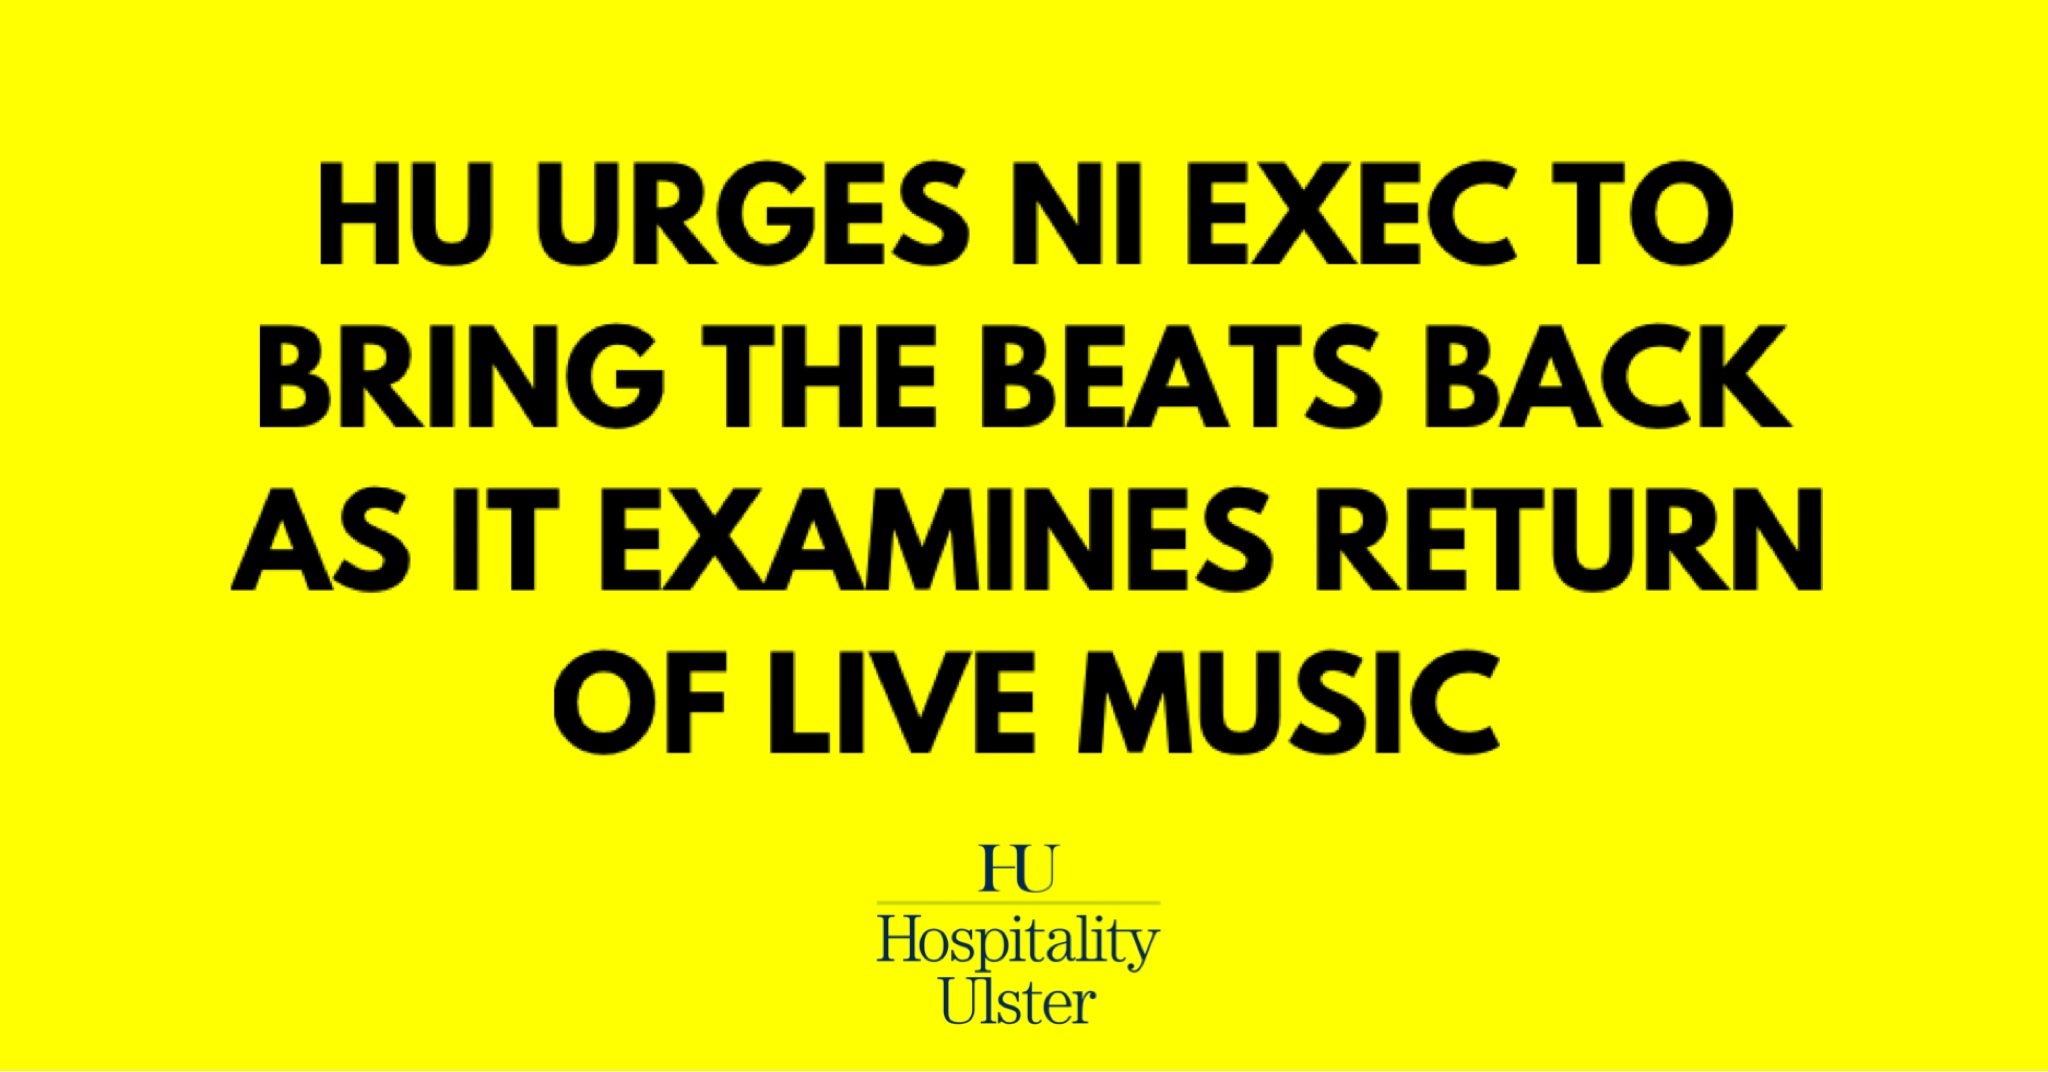 HU URGES NI EXEC TO BRING THE BEATS BACK AS IT EXAMINES RETURN OF LIVE MUSIC